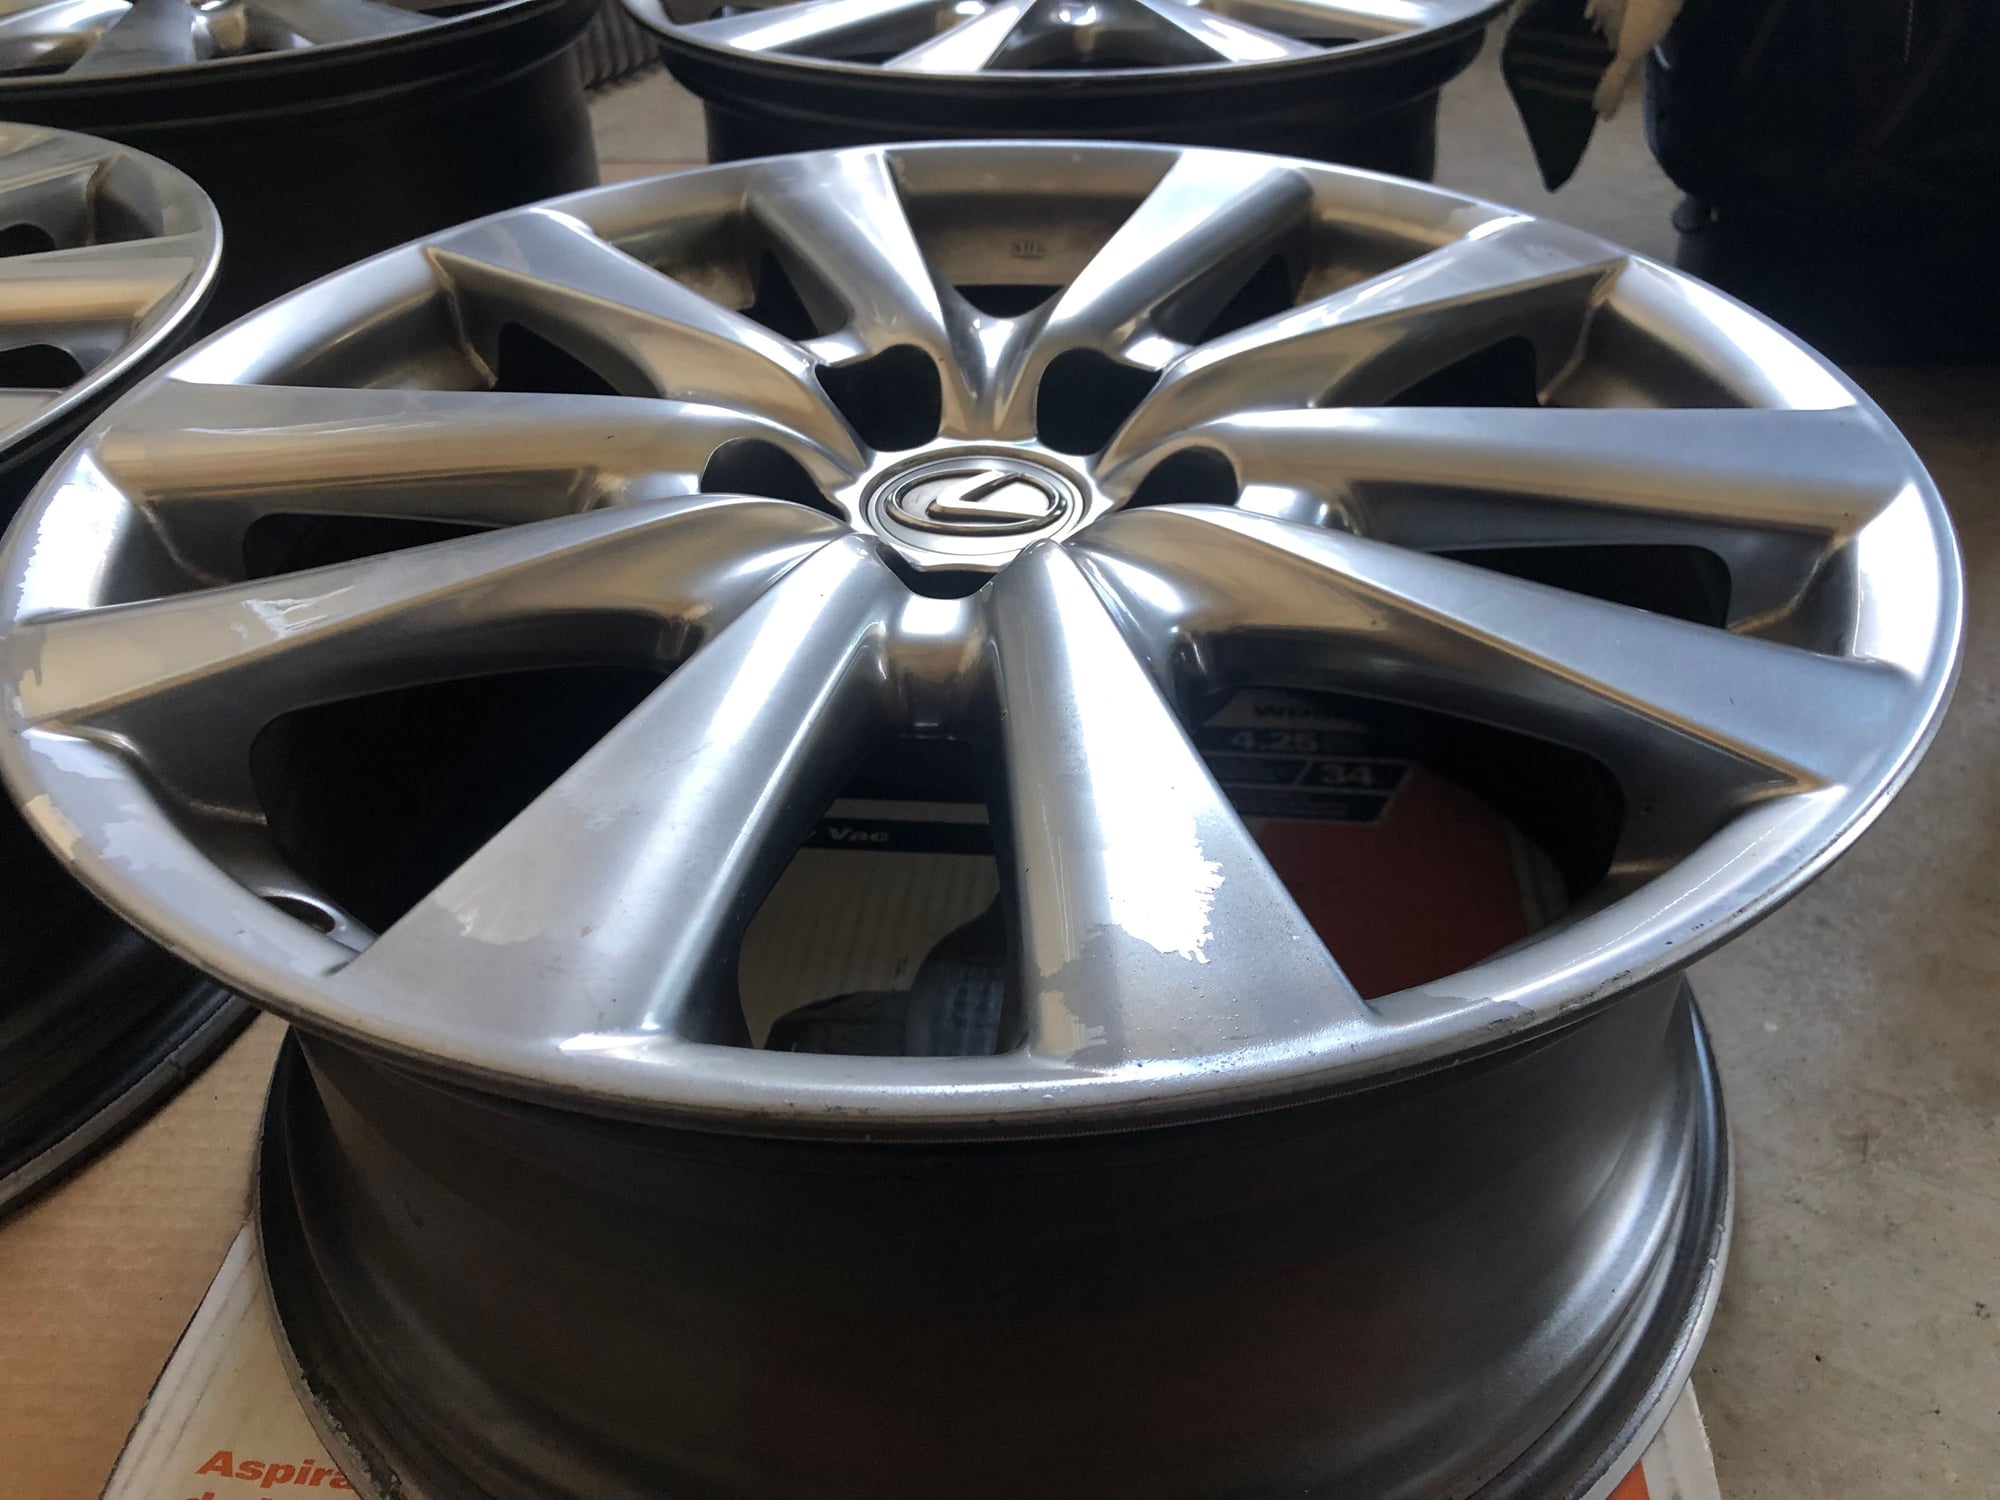 Wheels and Tires/Axles - 2013-2015 OEM Lexus GS350 450h 18" x 8" Wheels - Set of 4 - Used - 2013 to 2015 Lexus GS350 - 2013 to 2015 Lexus GS450h - Clifton, VA 20124, United States